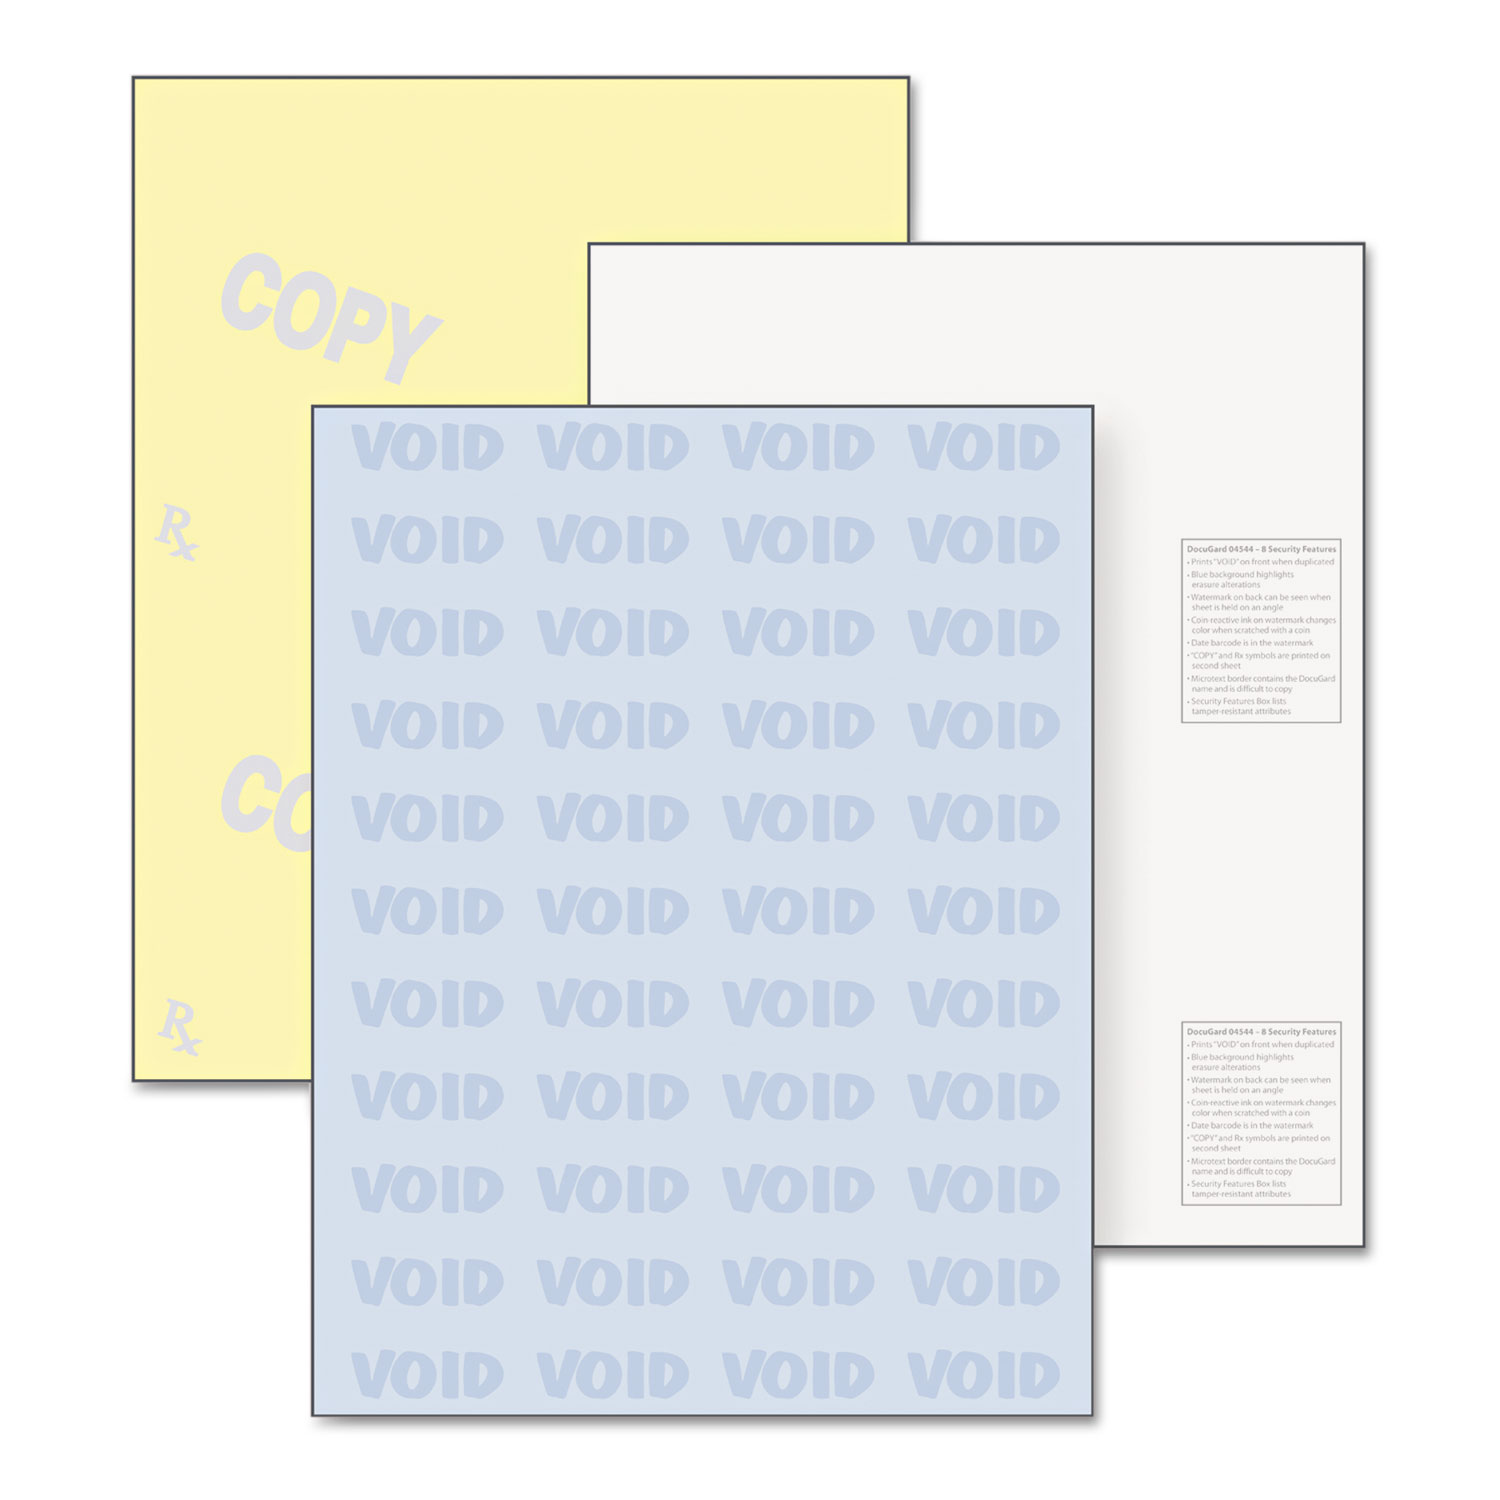 DocuGard Standard 2-part Medical Security Paper - Letter - 8 1/2" x 11" - 24 lb Basis Weight - 250 / Pack - Tamper Resistant, Pa